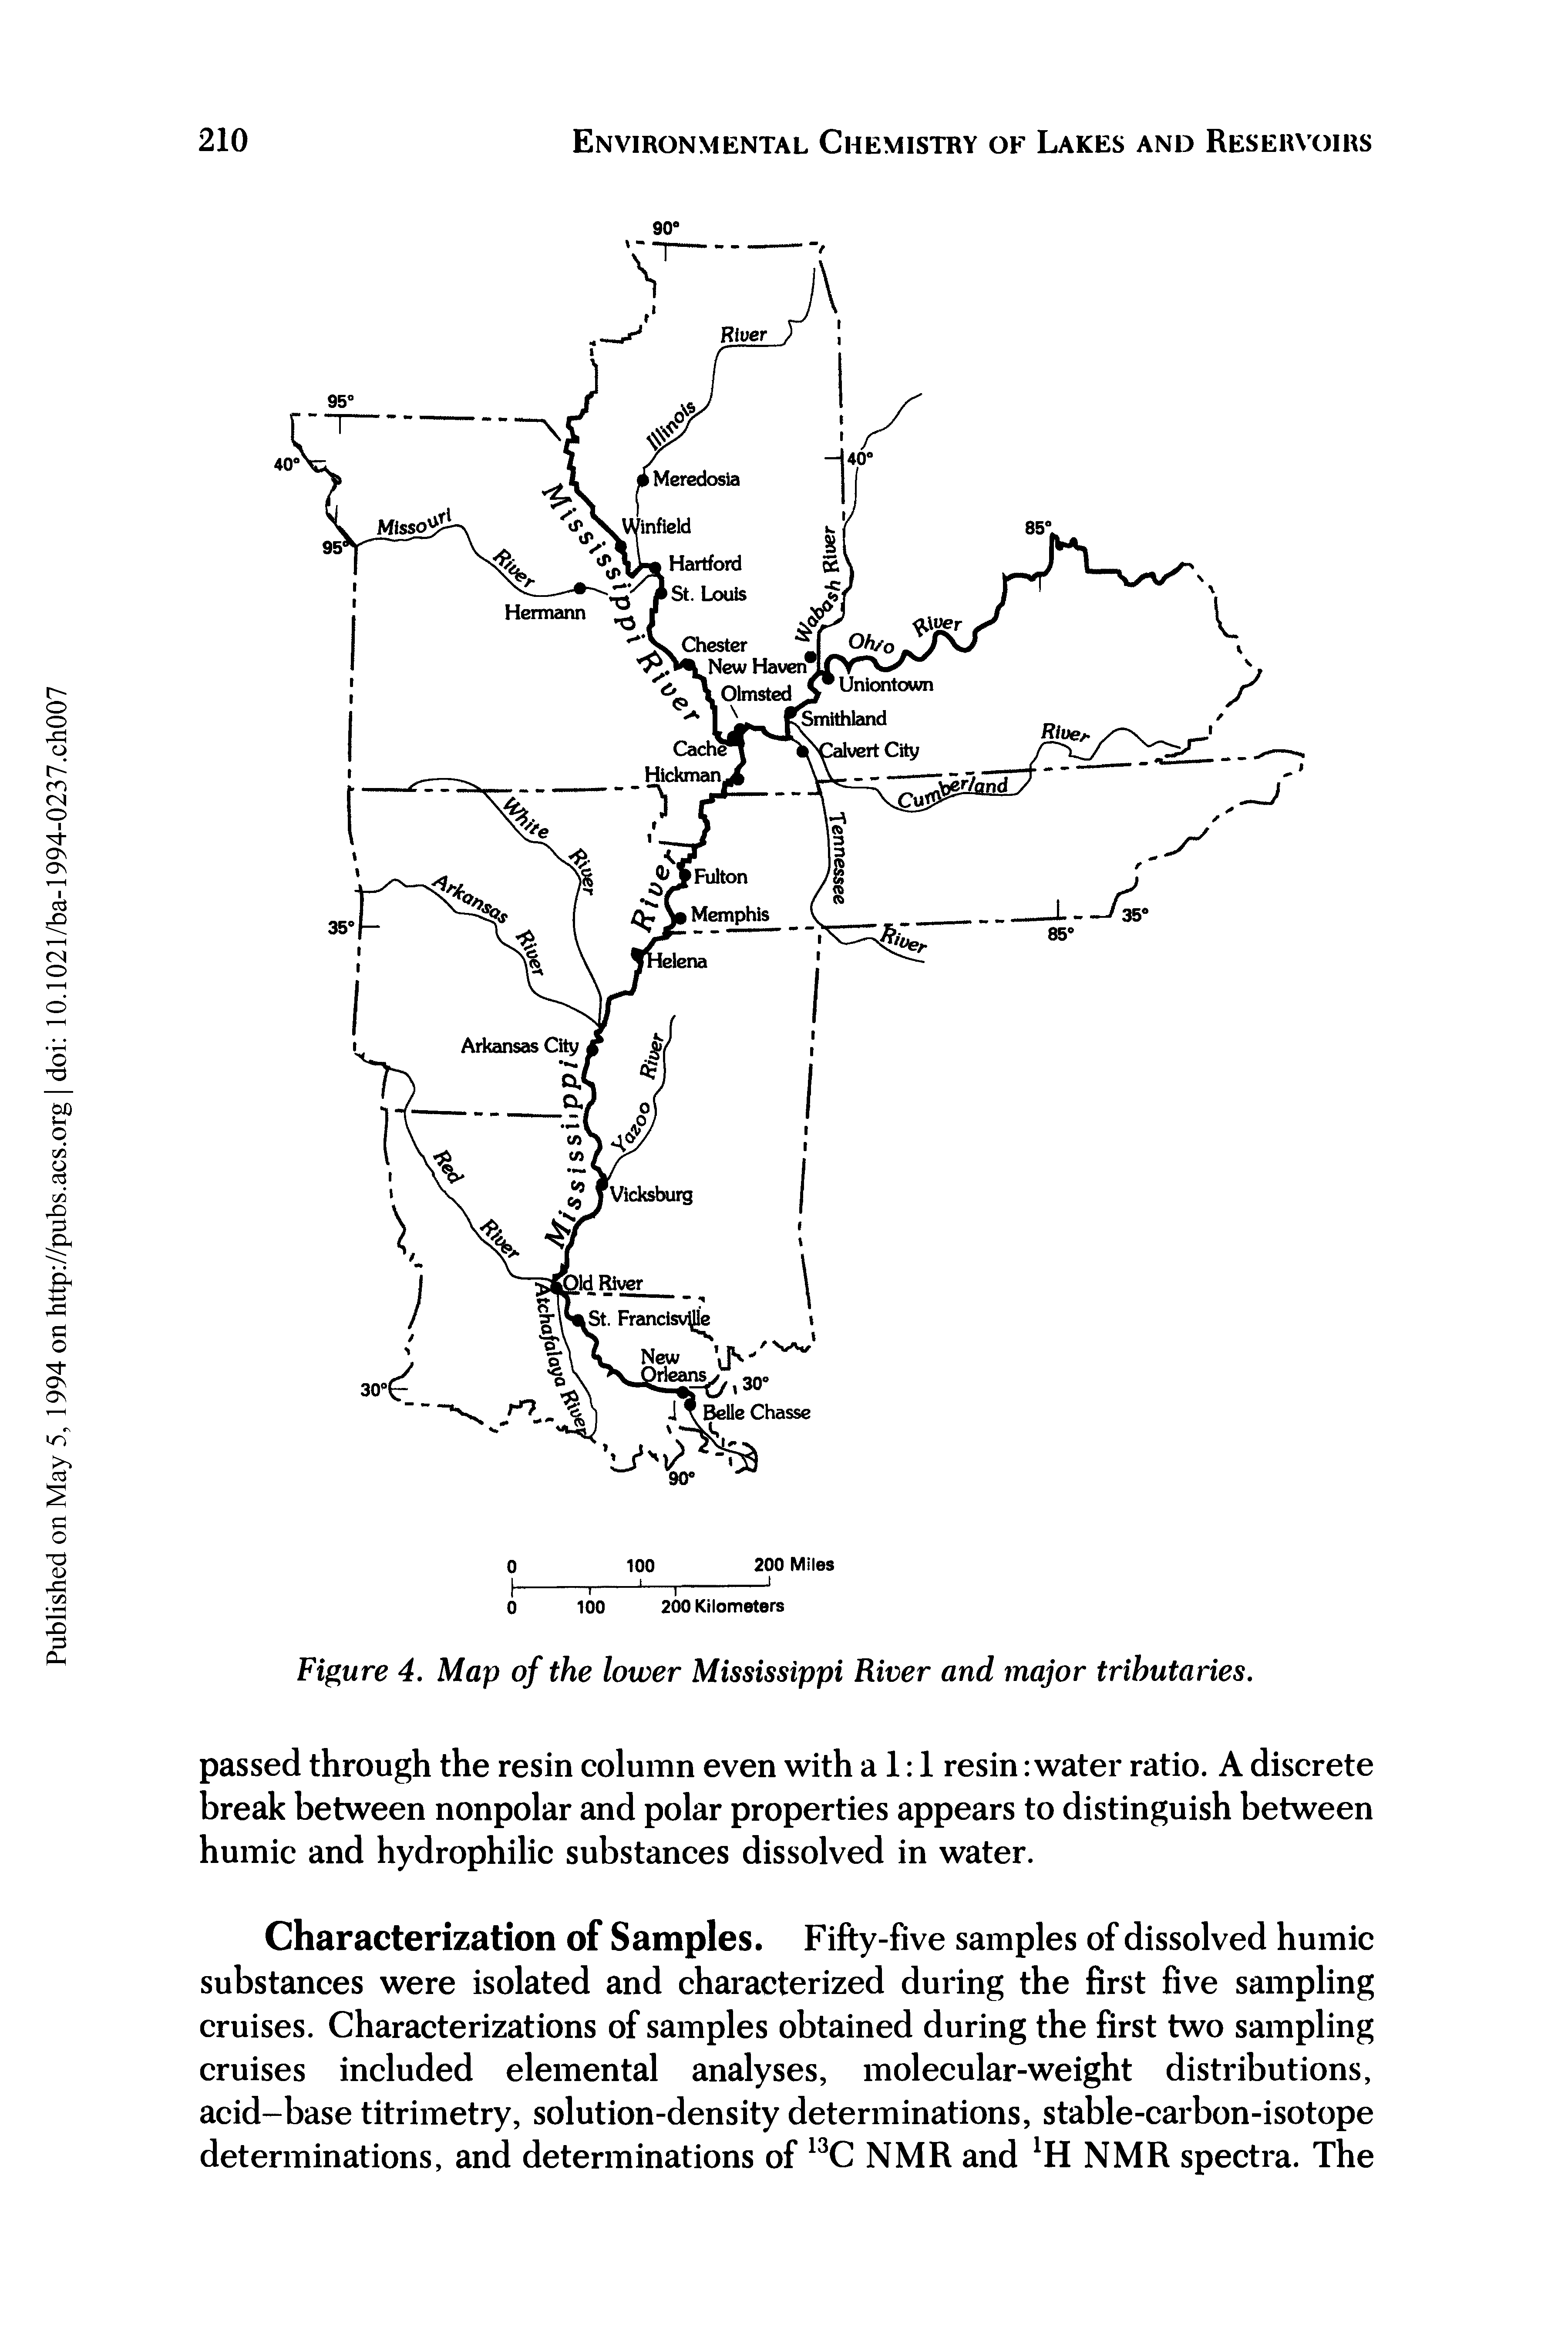 Figure 4. Map of the lower Mississippi River and major tributaries.